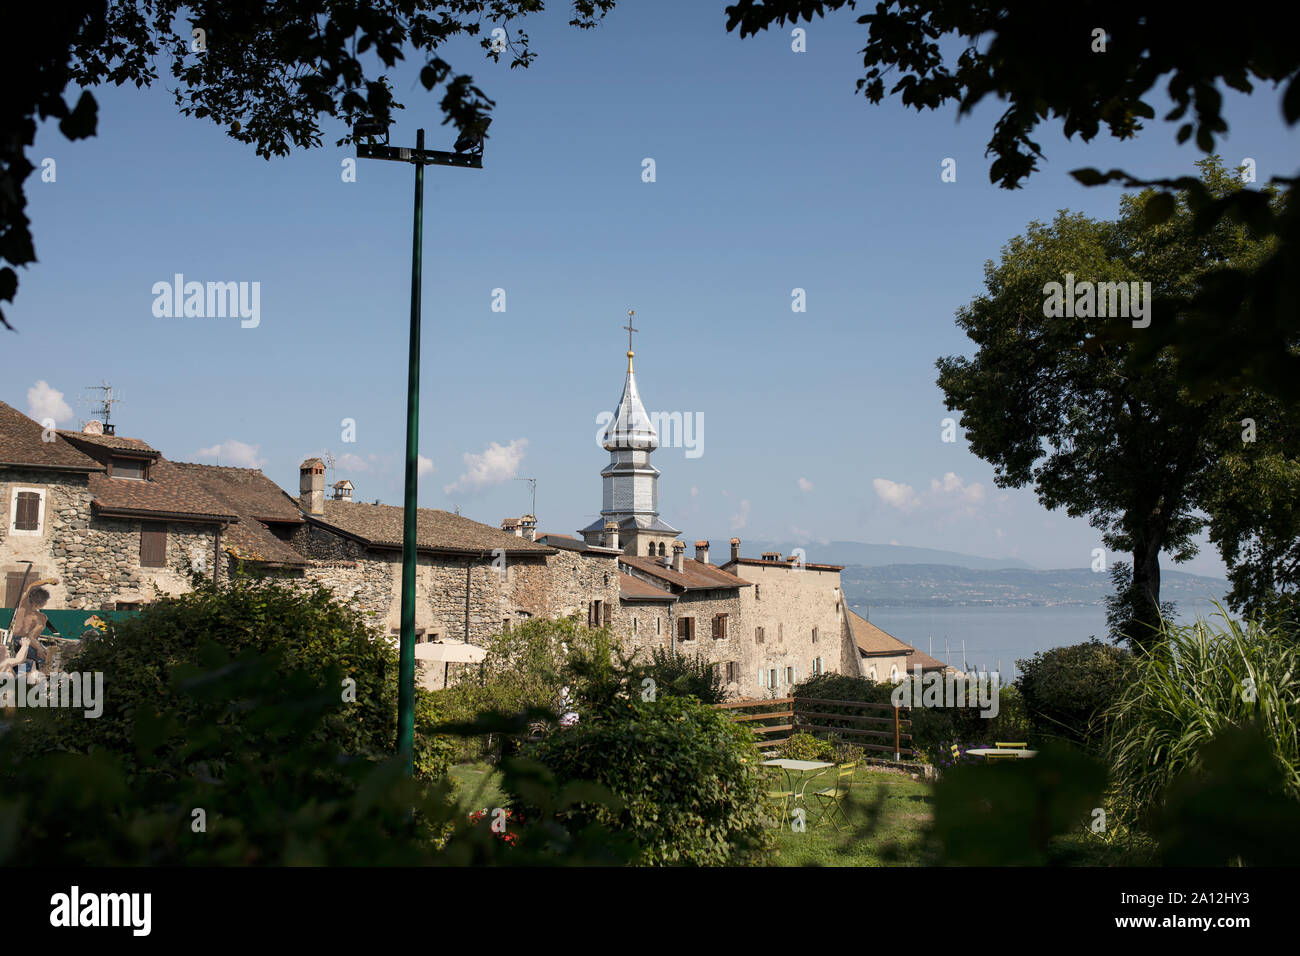 The Saint Pancrace church overlooking the town of Yvoire, France, on Lac Léman (Lake Geneva) in the department of Haute-Savoie, Auvergne-Rhône-Alpes. Stock Photo